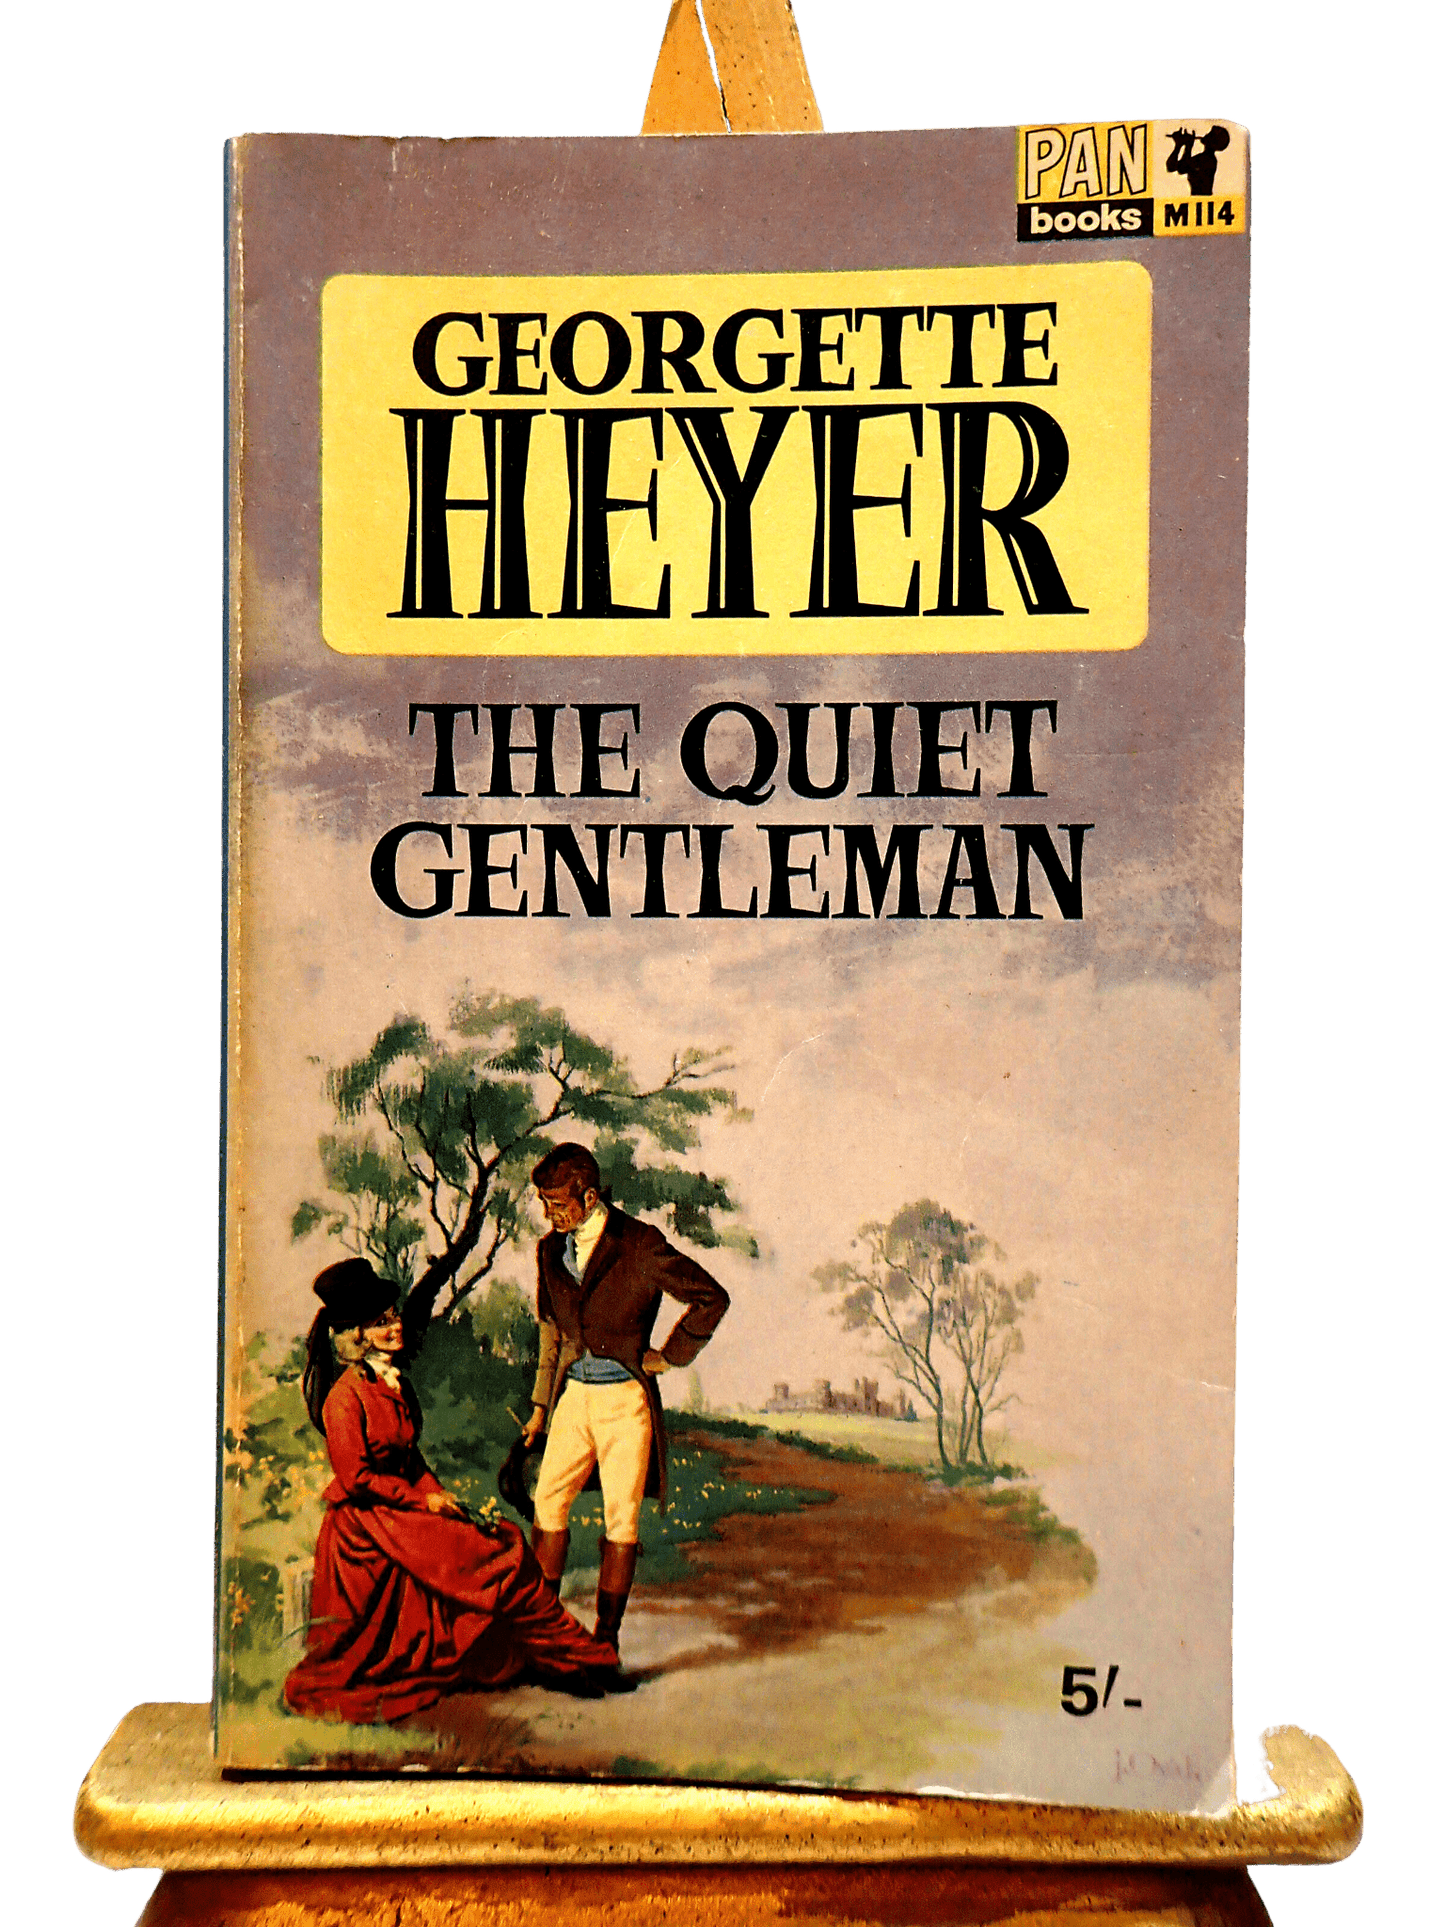 Front cover showing a lady in a Riding Habit of The Quiet Gentleman by Georgette Heyer First Edition Pan Paperback